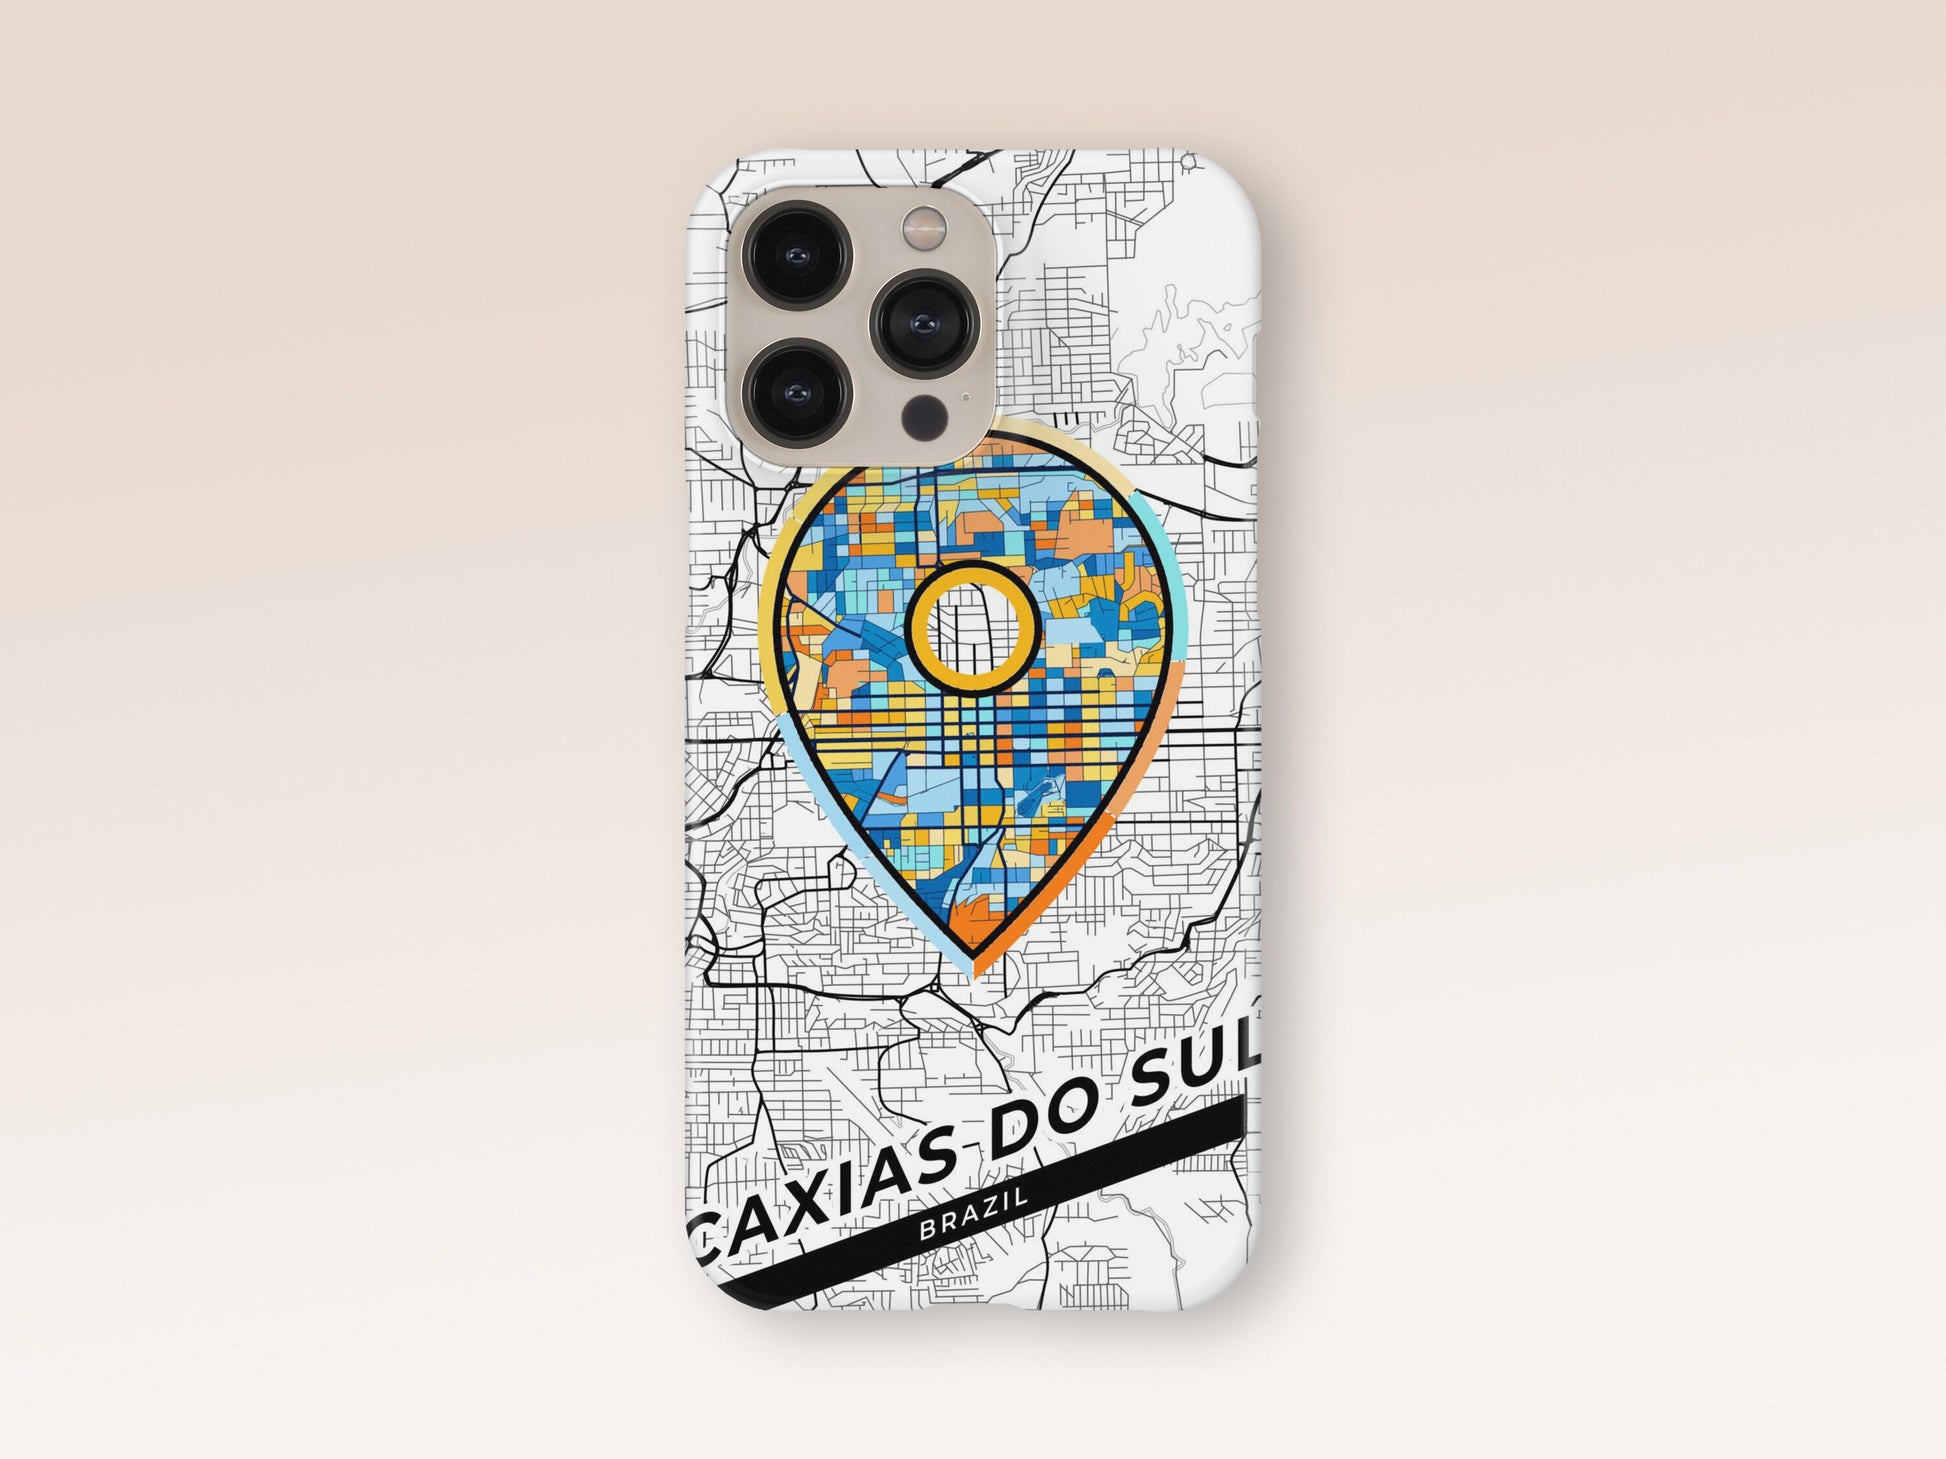 Caxias Do Sul Brazil slim phone case with colorful icon. Birthday, wedding or housewarming gift. Couple match cases. 1